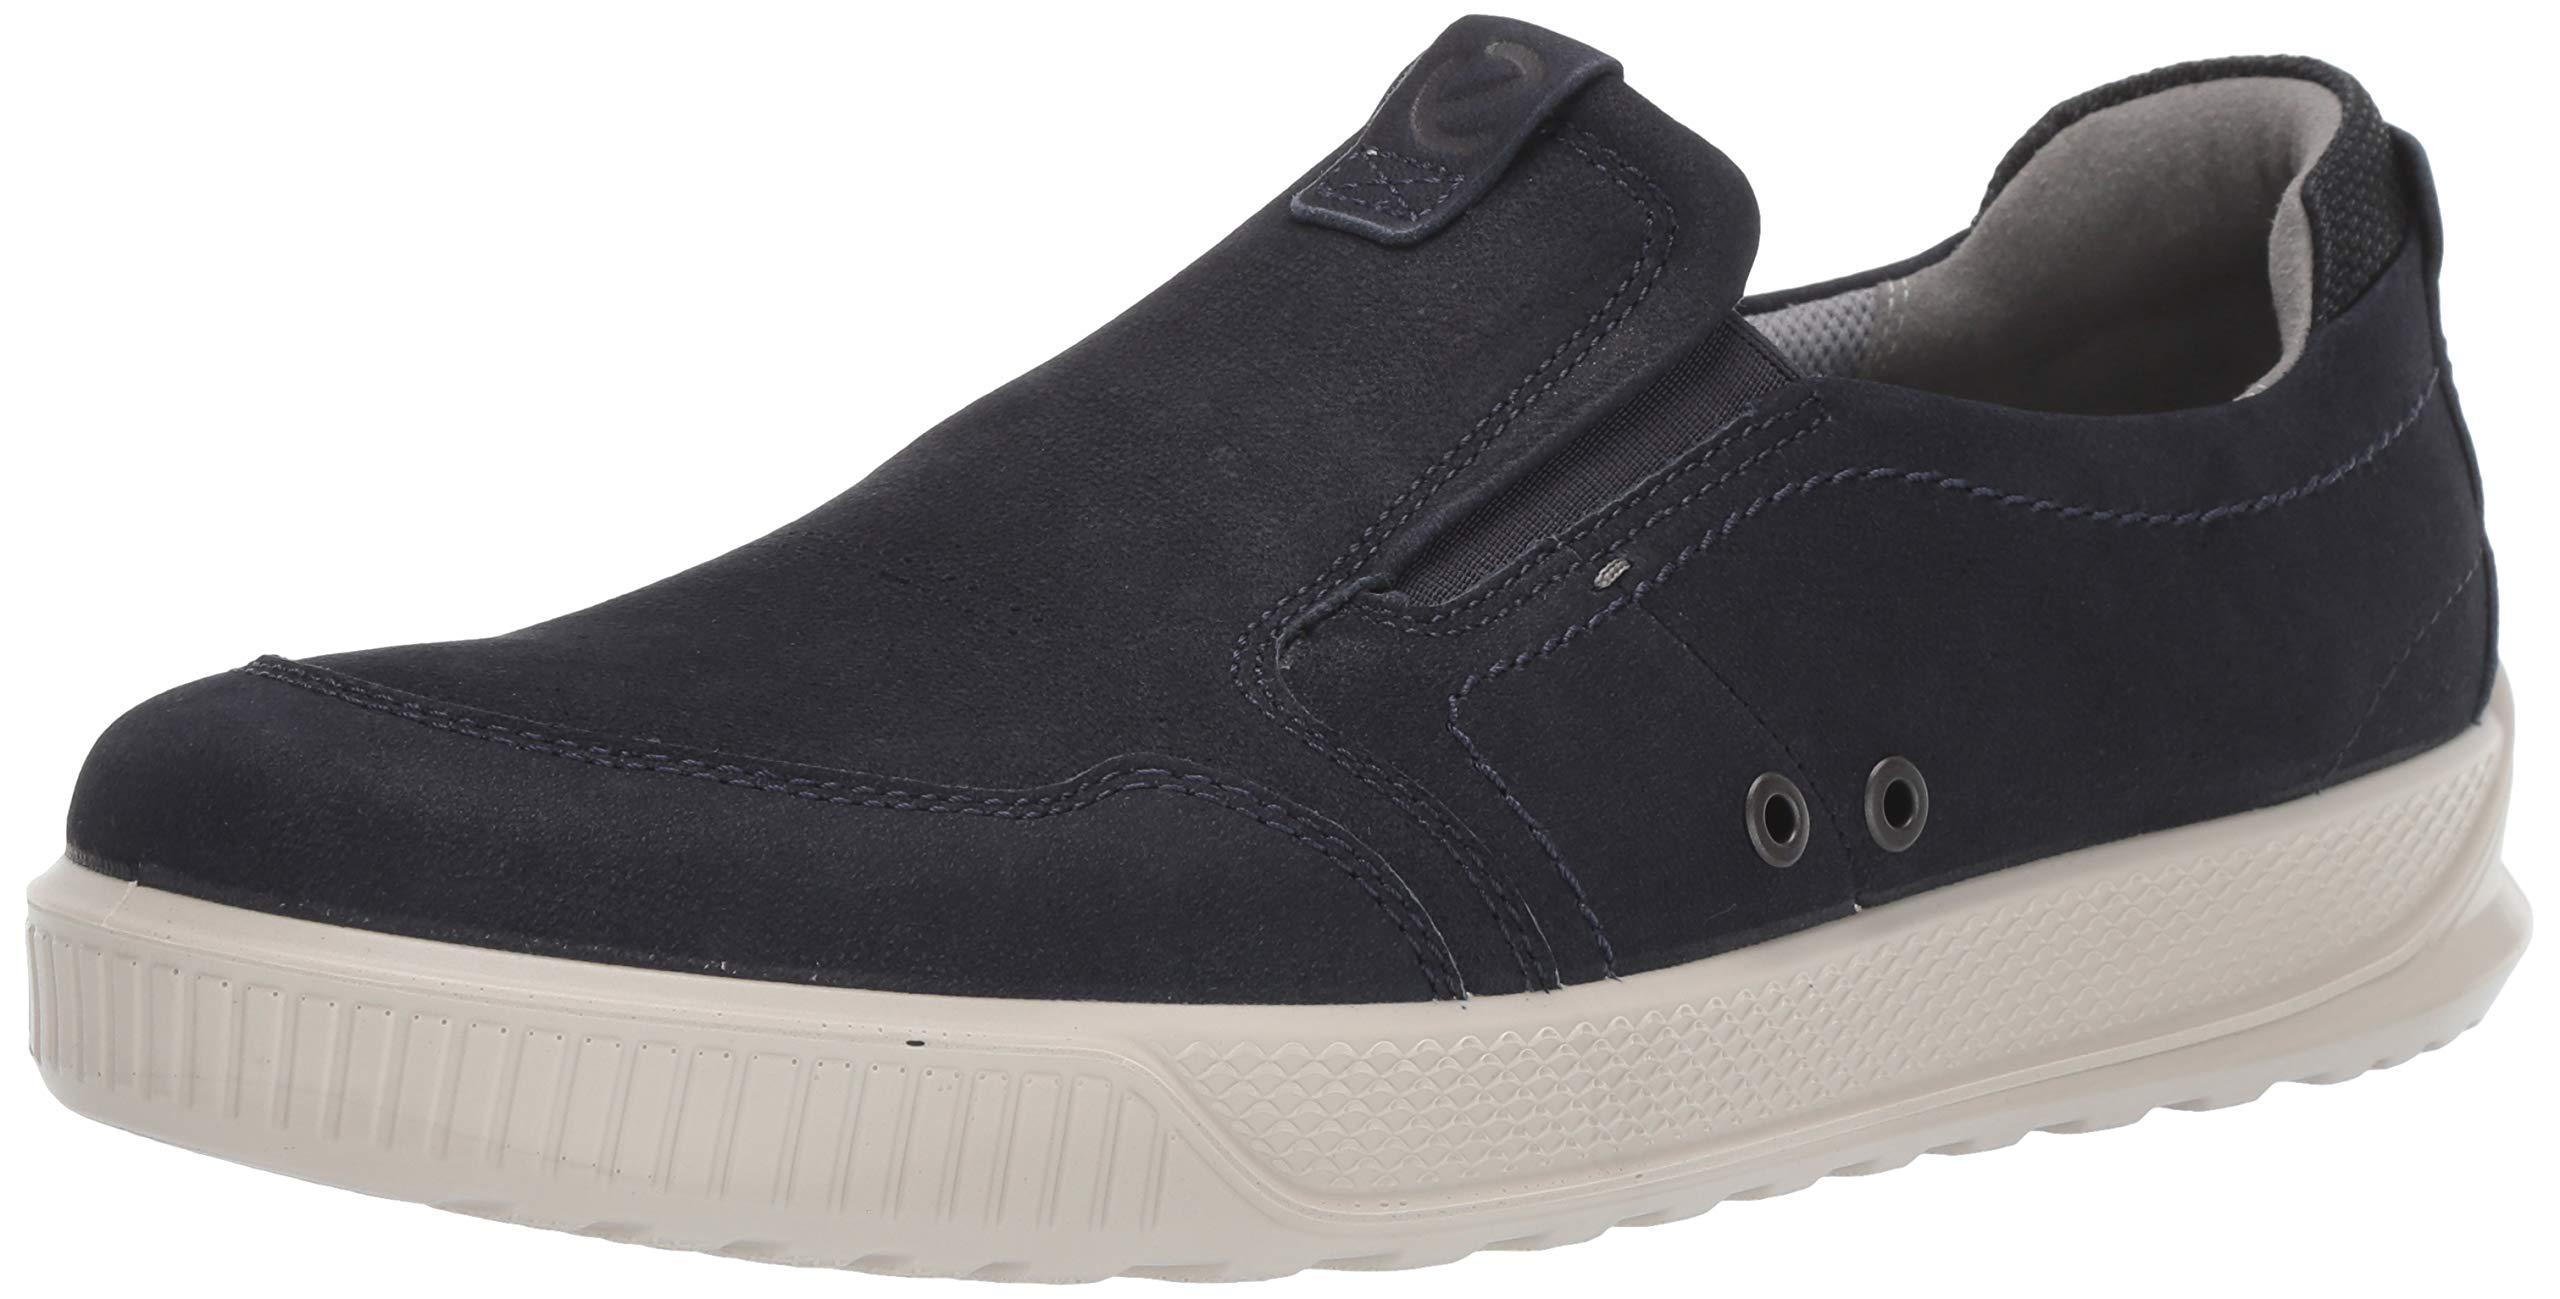 Ecco Leather Byway Slip On Sneaker in Navy Nubuck (Blue) for Men - Save ...